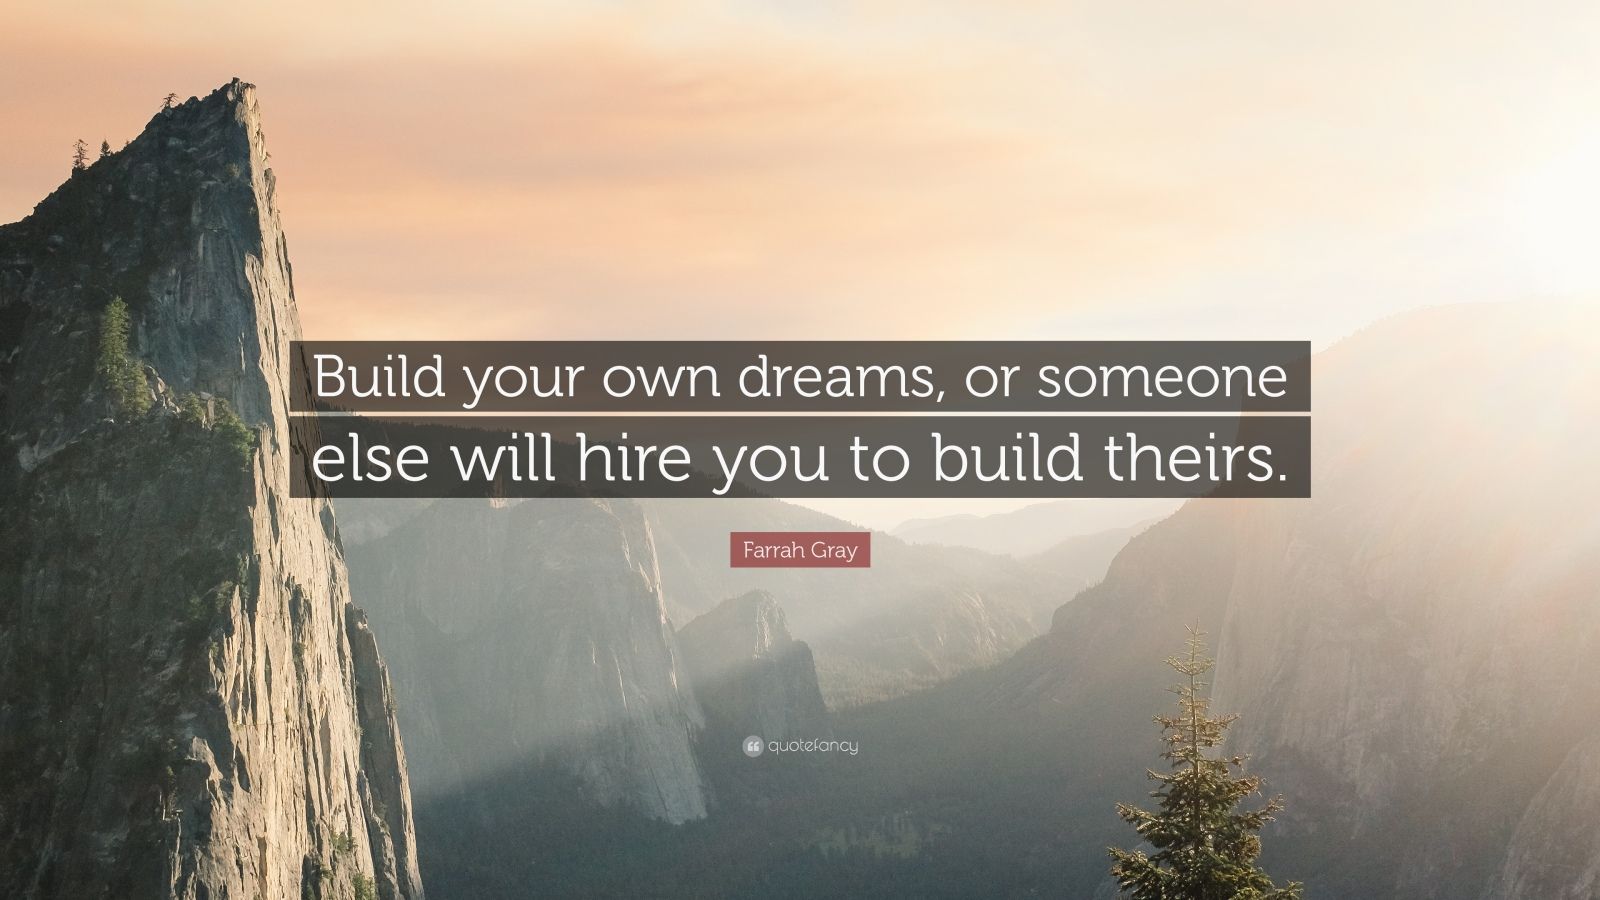 Farrah Gray Quote: "Build your own dreams, or someone else will hire you to build theirs." (33 ...